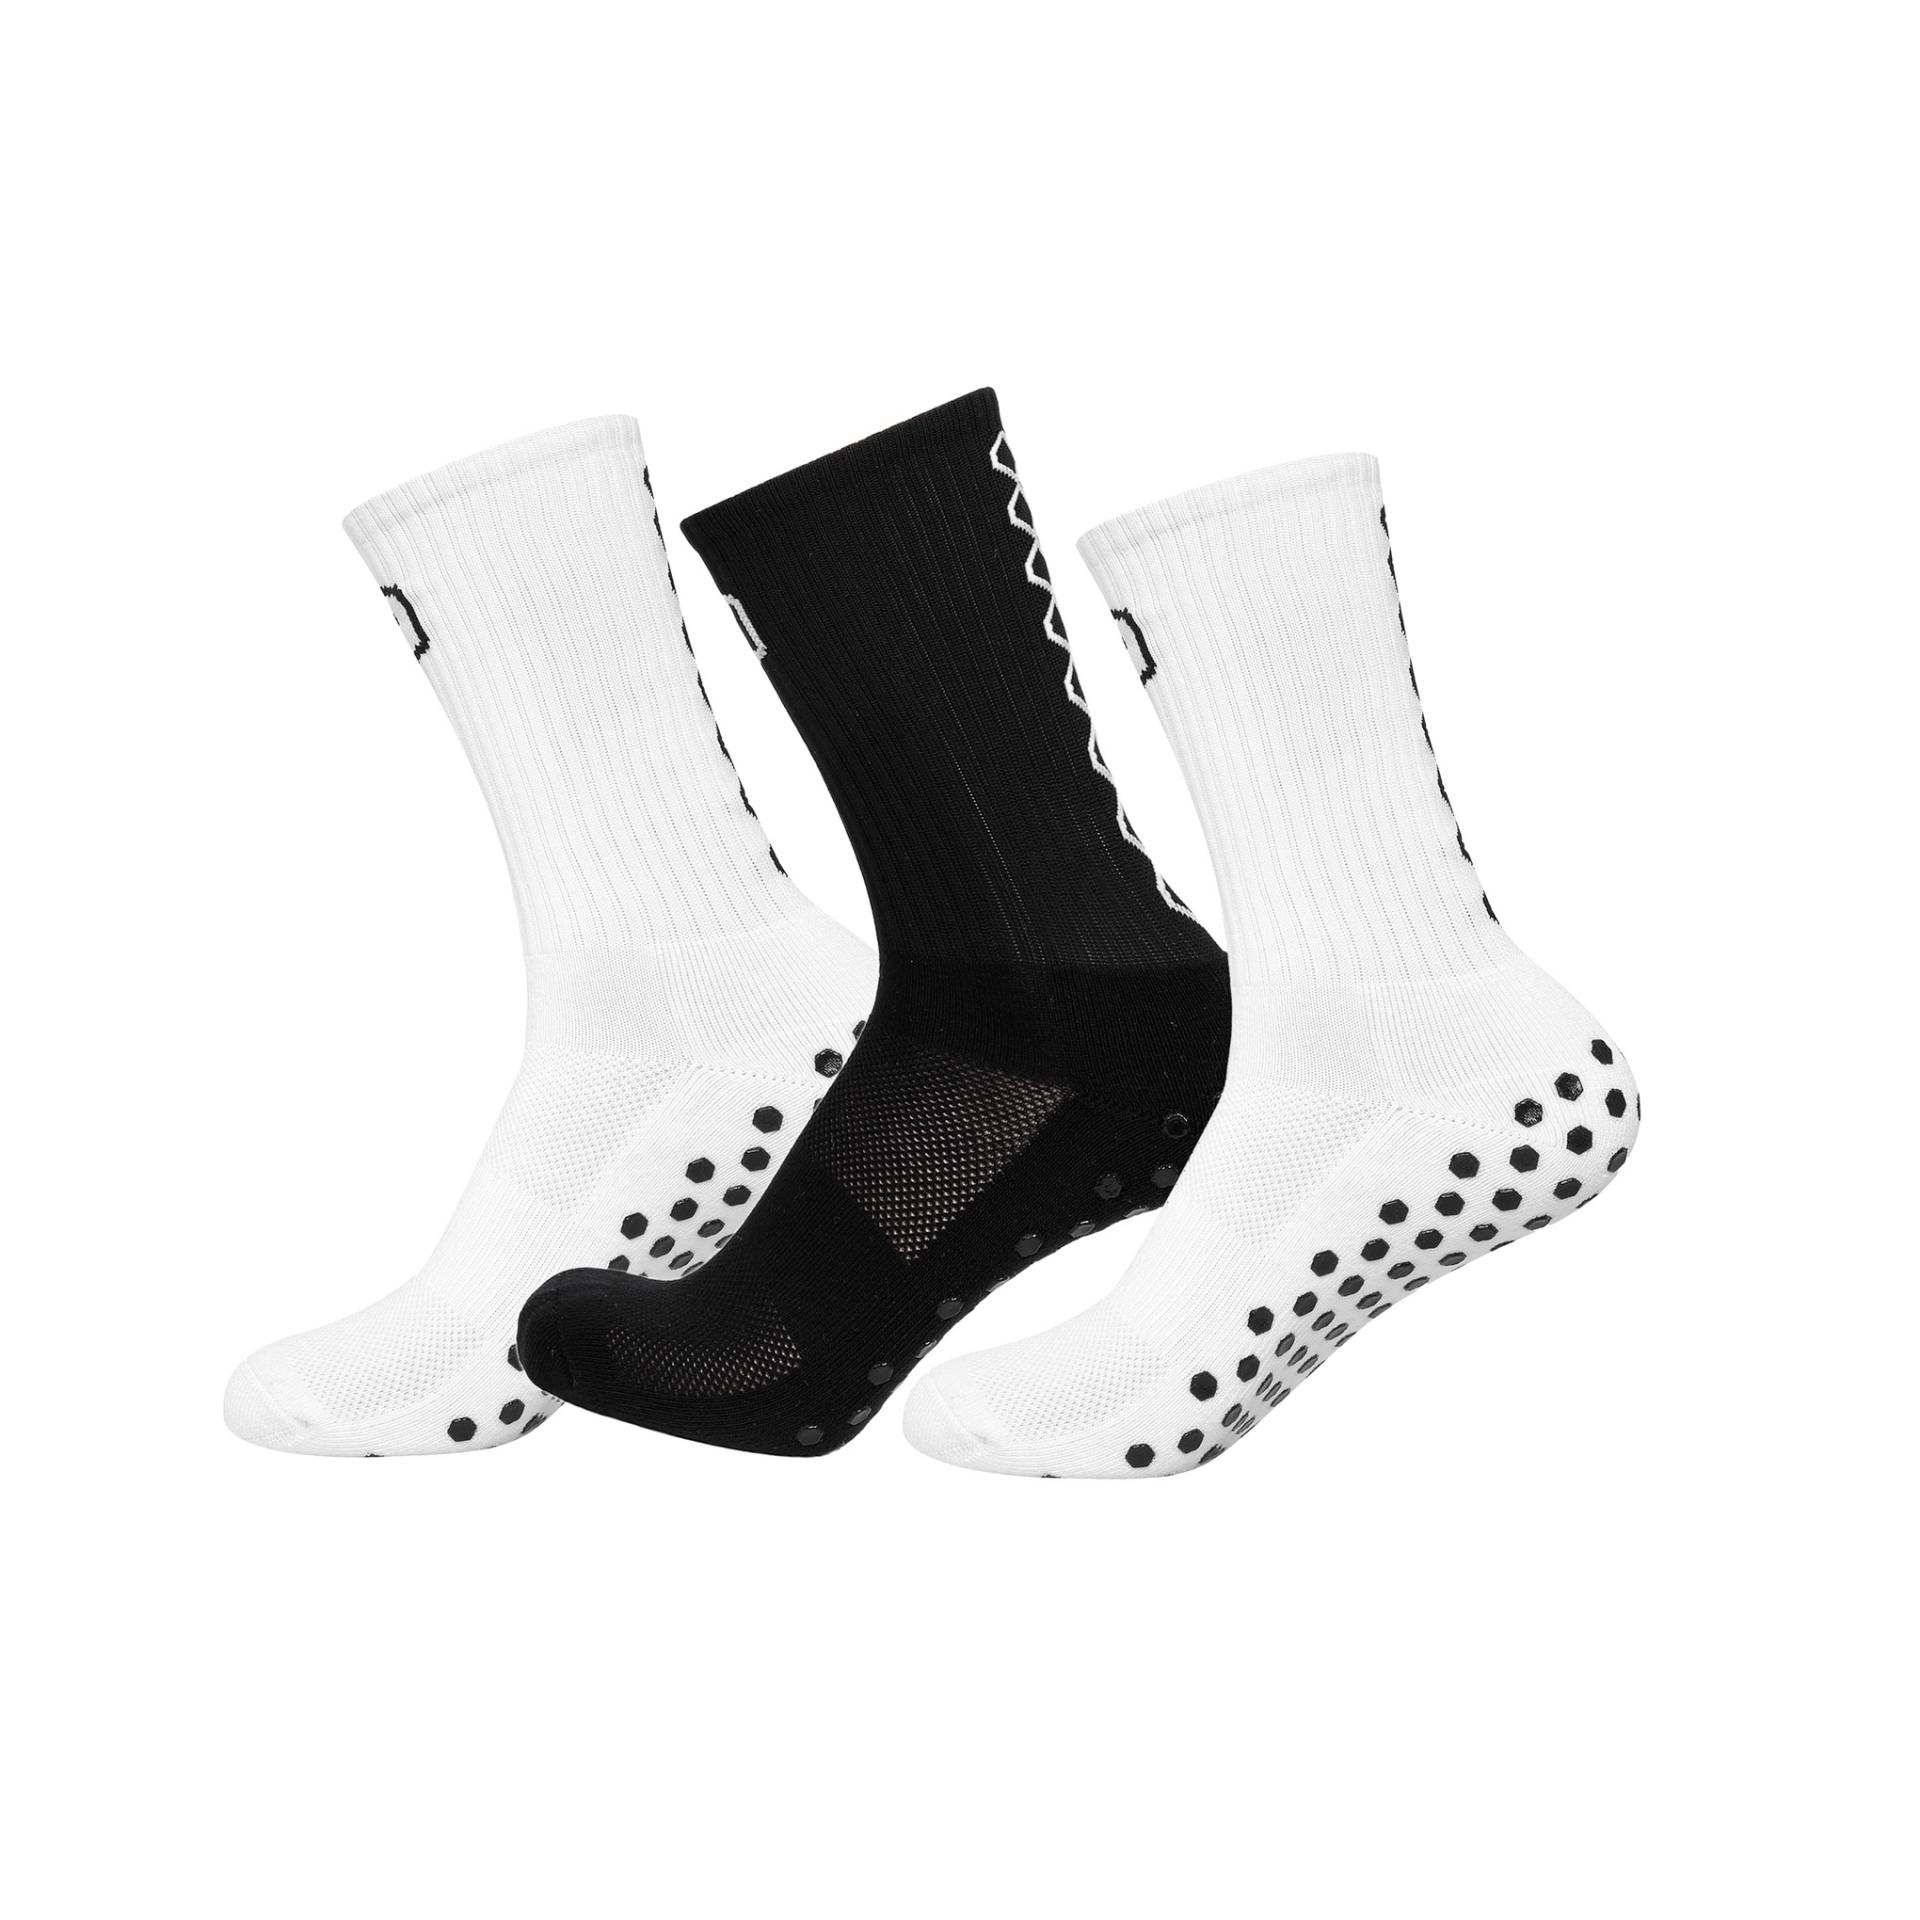 Comprar Pack 3 Pares Calcetines Antideslizantes en Influence Quality